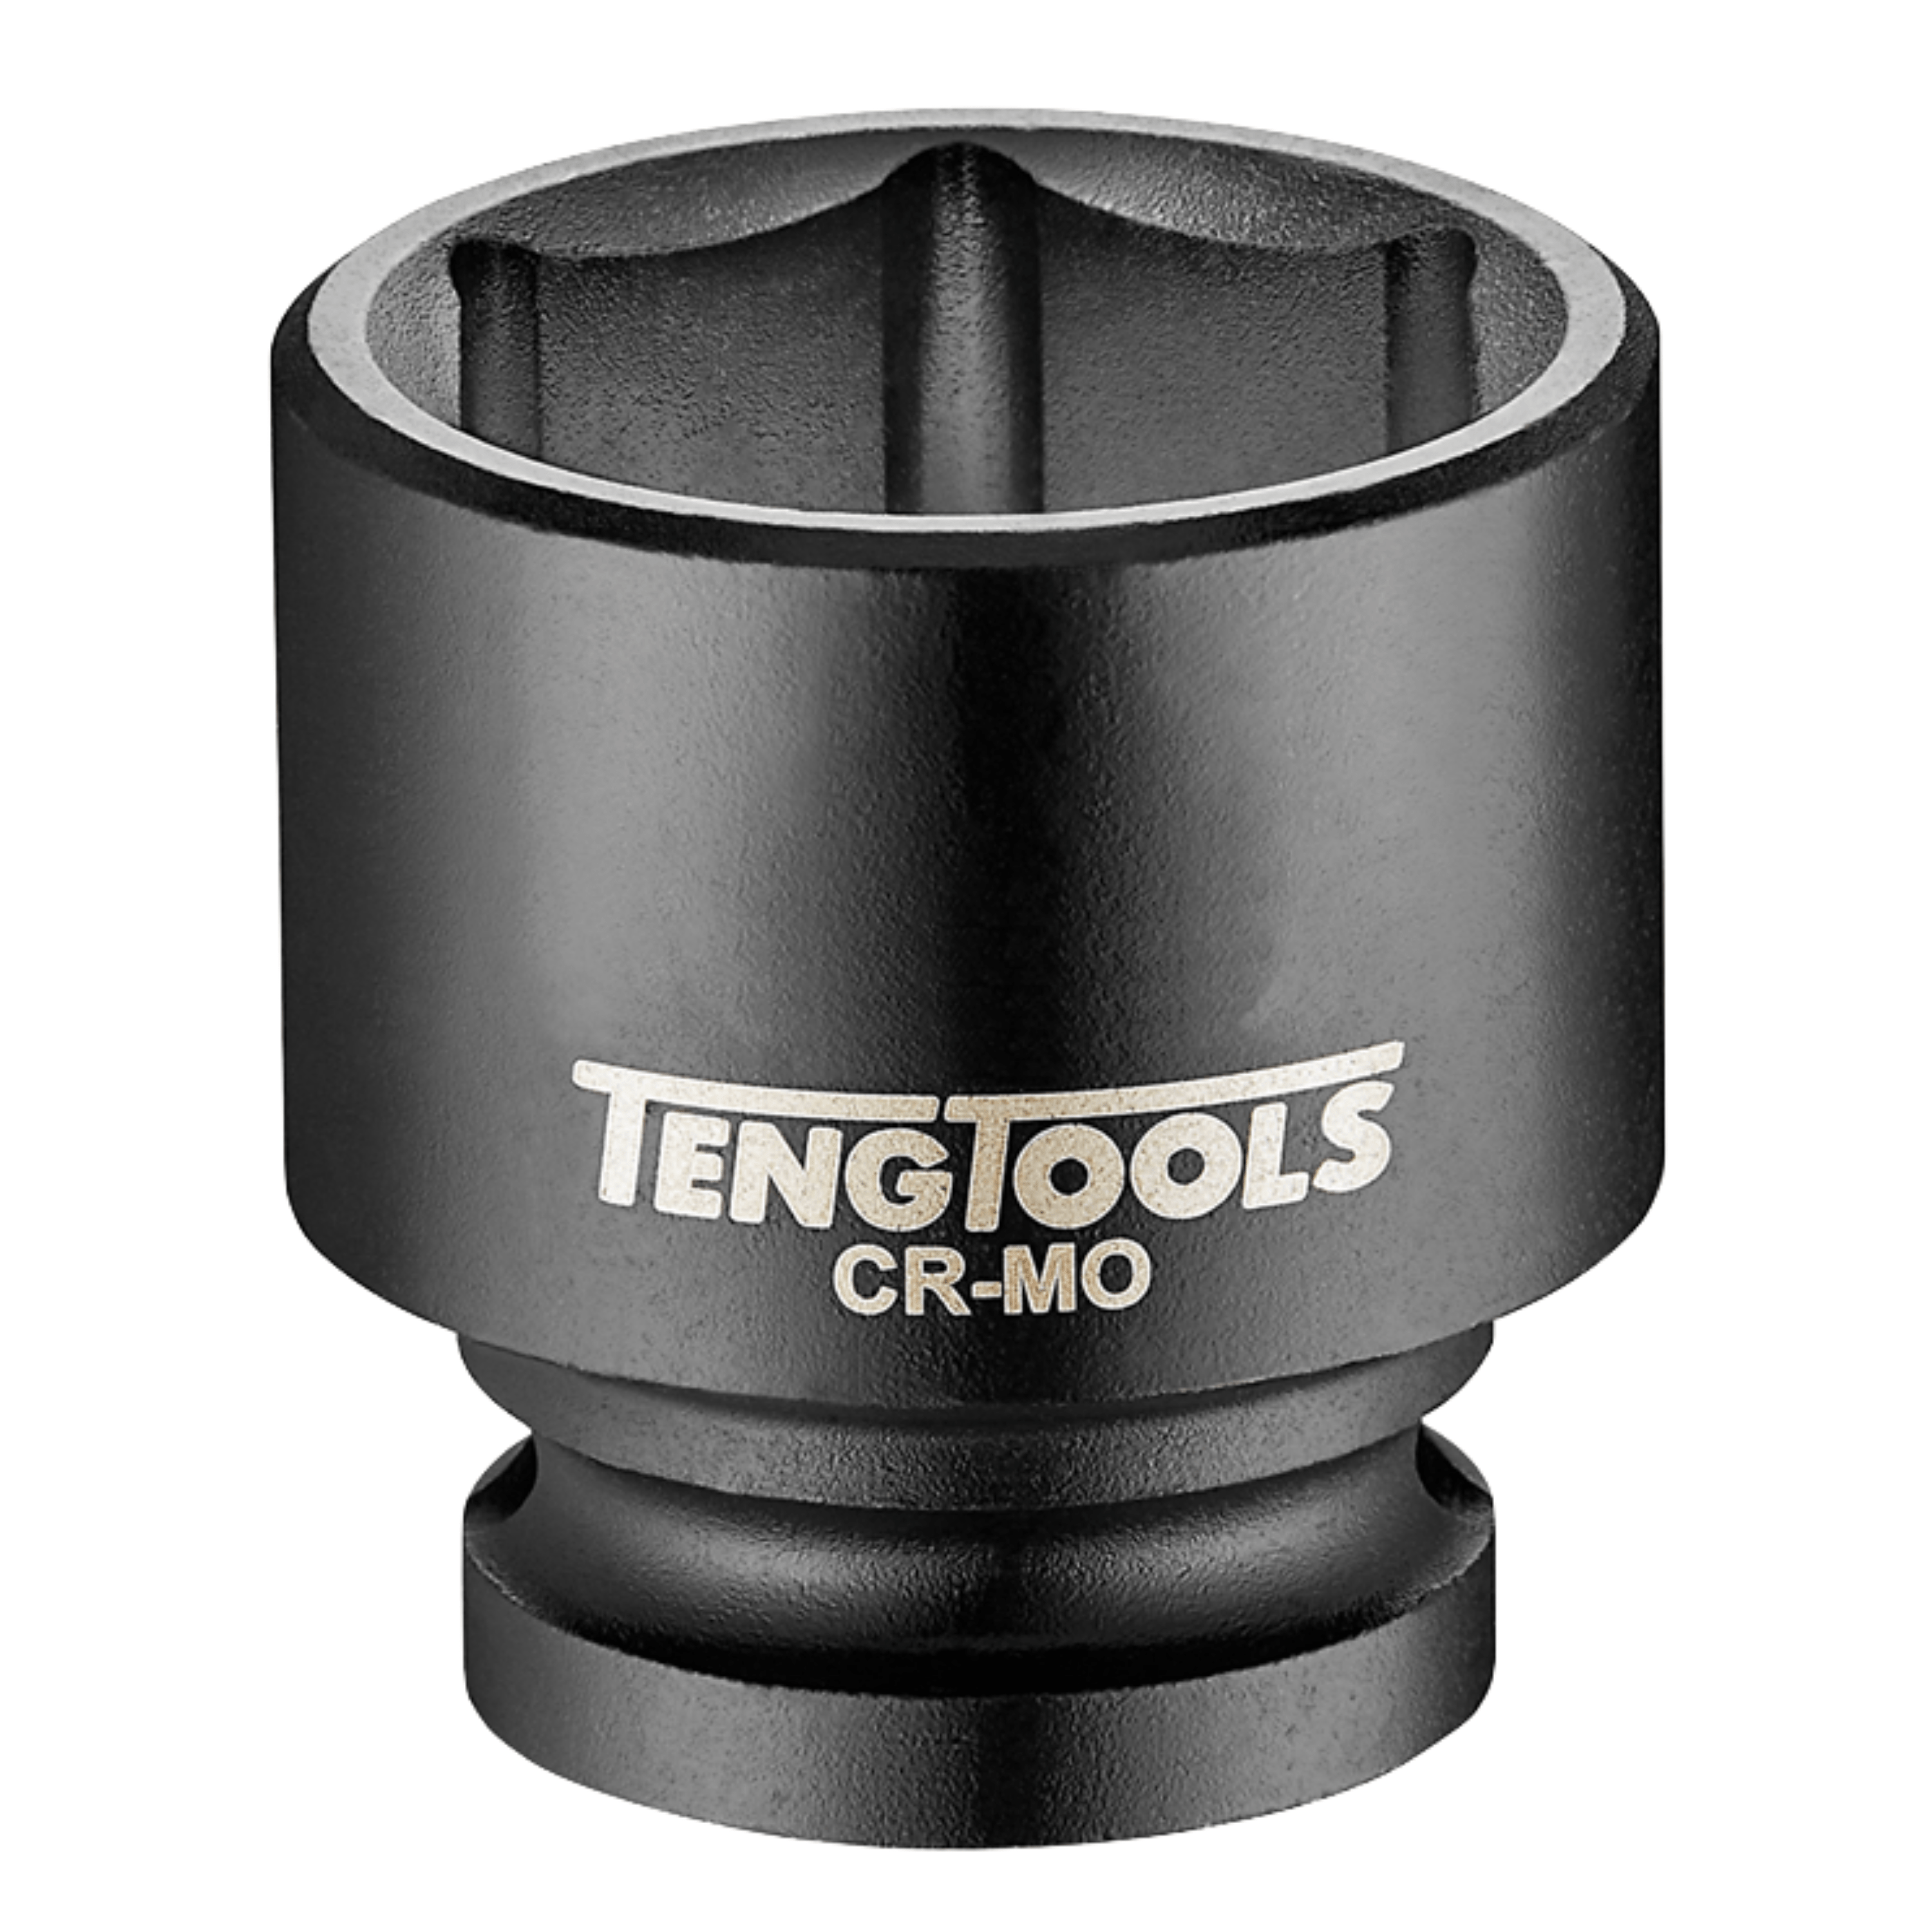 Teng Tools 1-1/2 Inch Drive 6 Point Metric Shallow Chrome Molybdenum Impact Sockets - 46mm